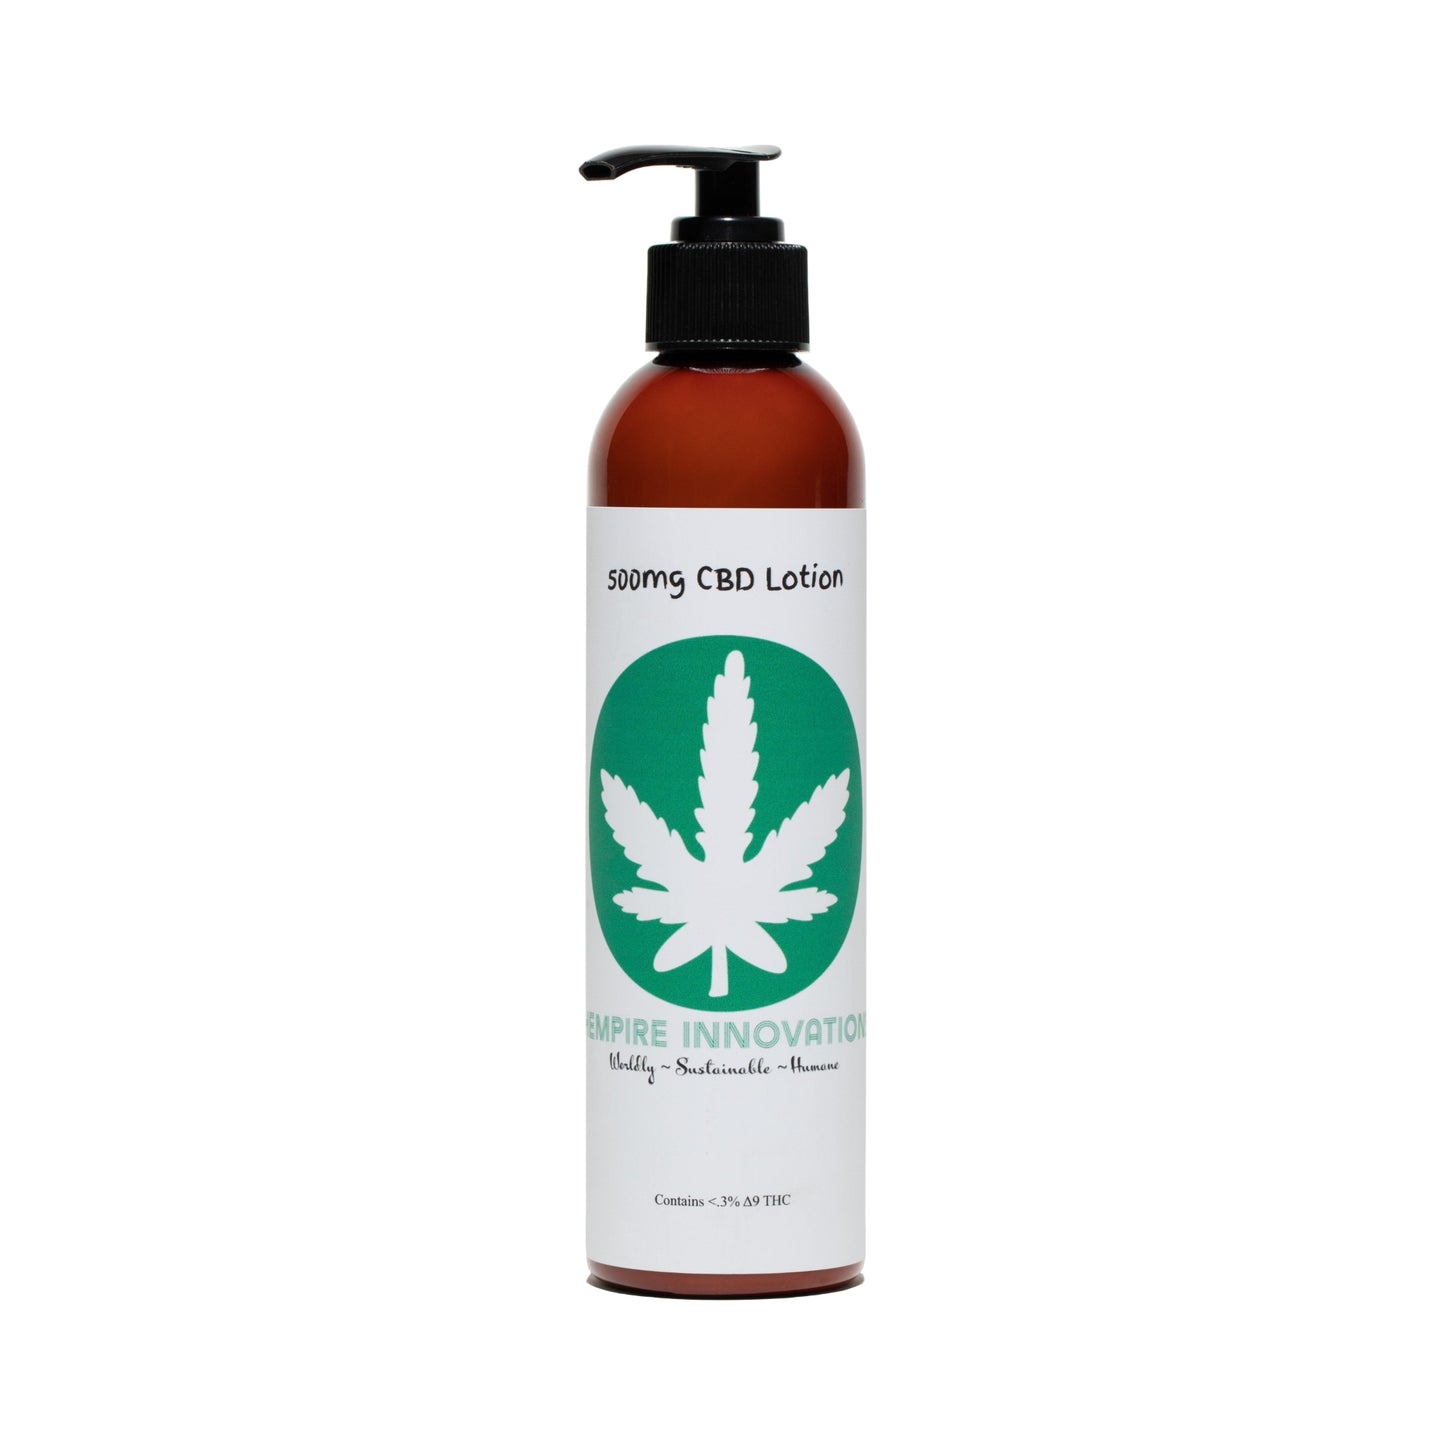 
                  
                    500mg CBD Infused Lotion in sleek packaging, labeled with key ingredients like CBD Distillate
                  
                